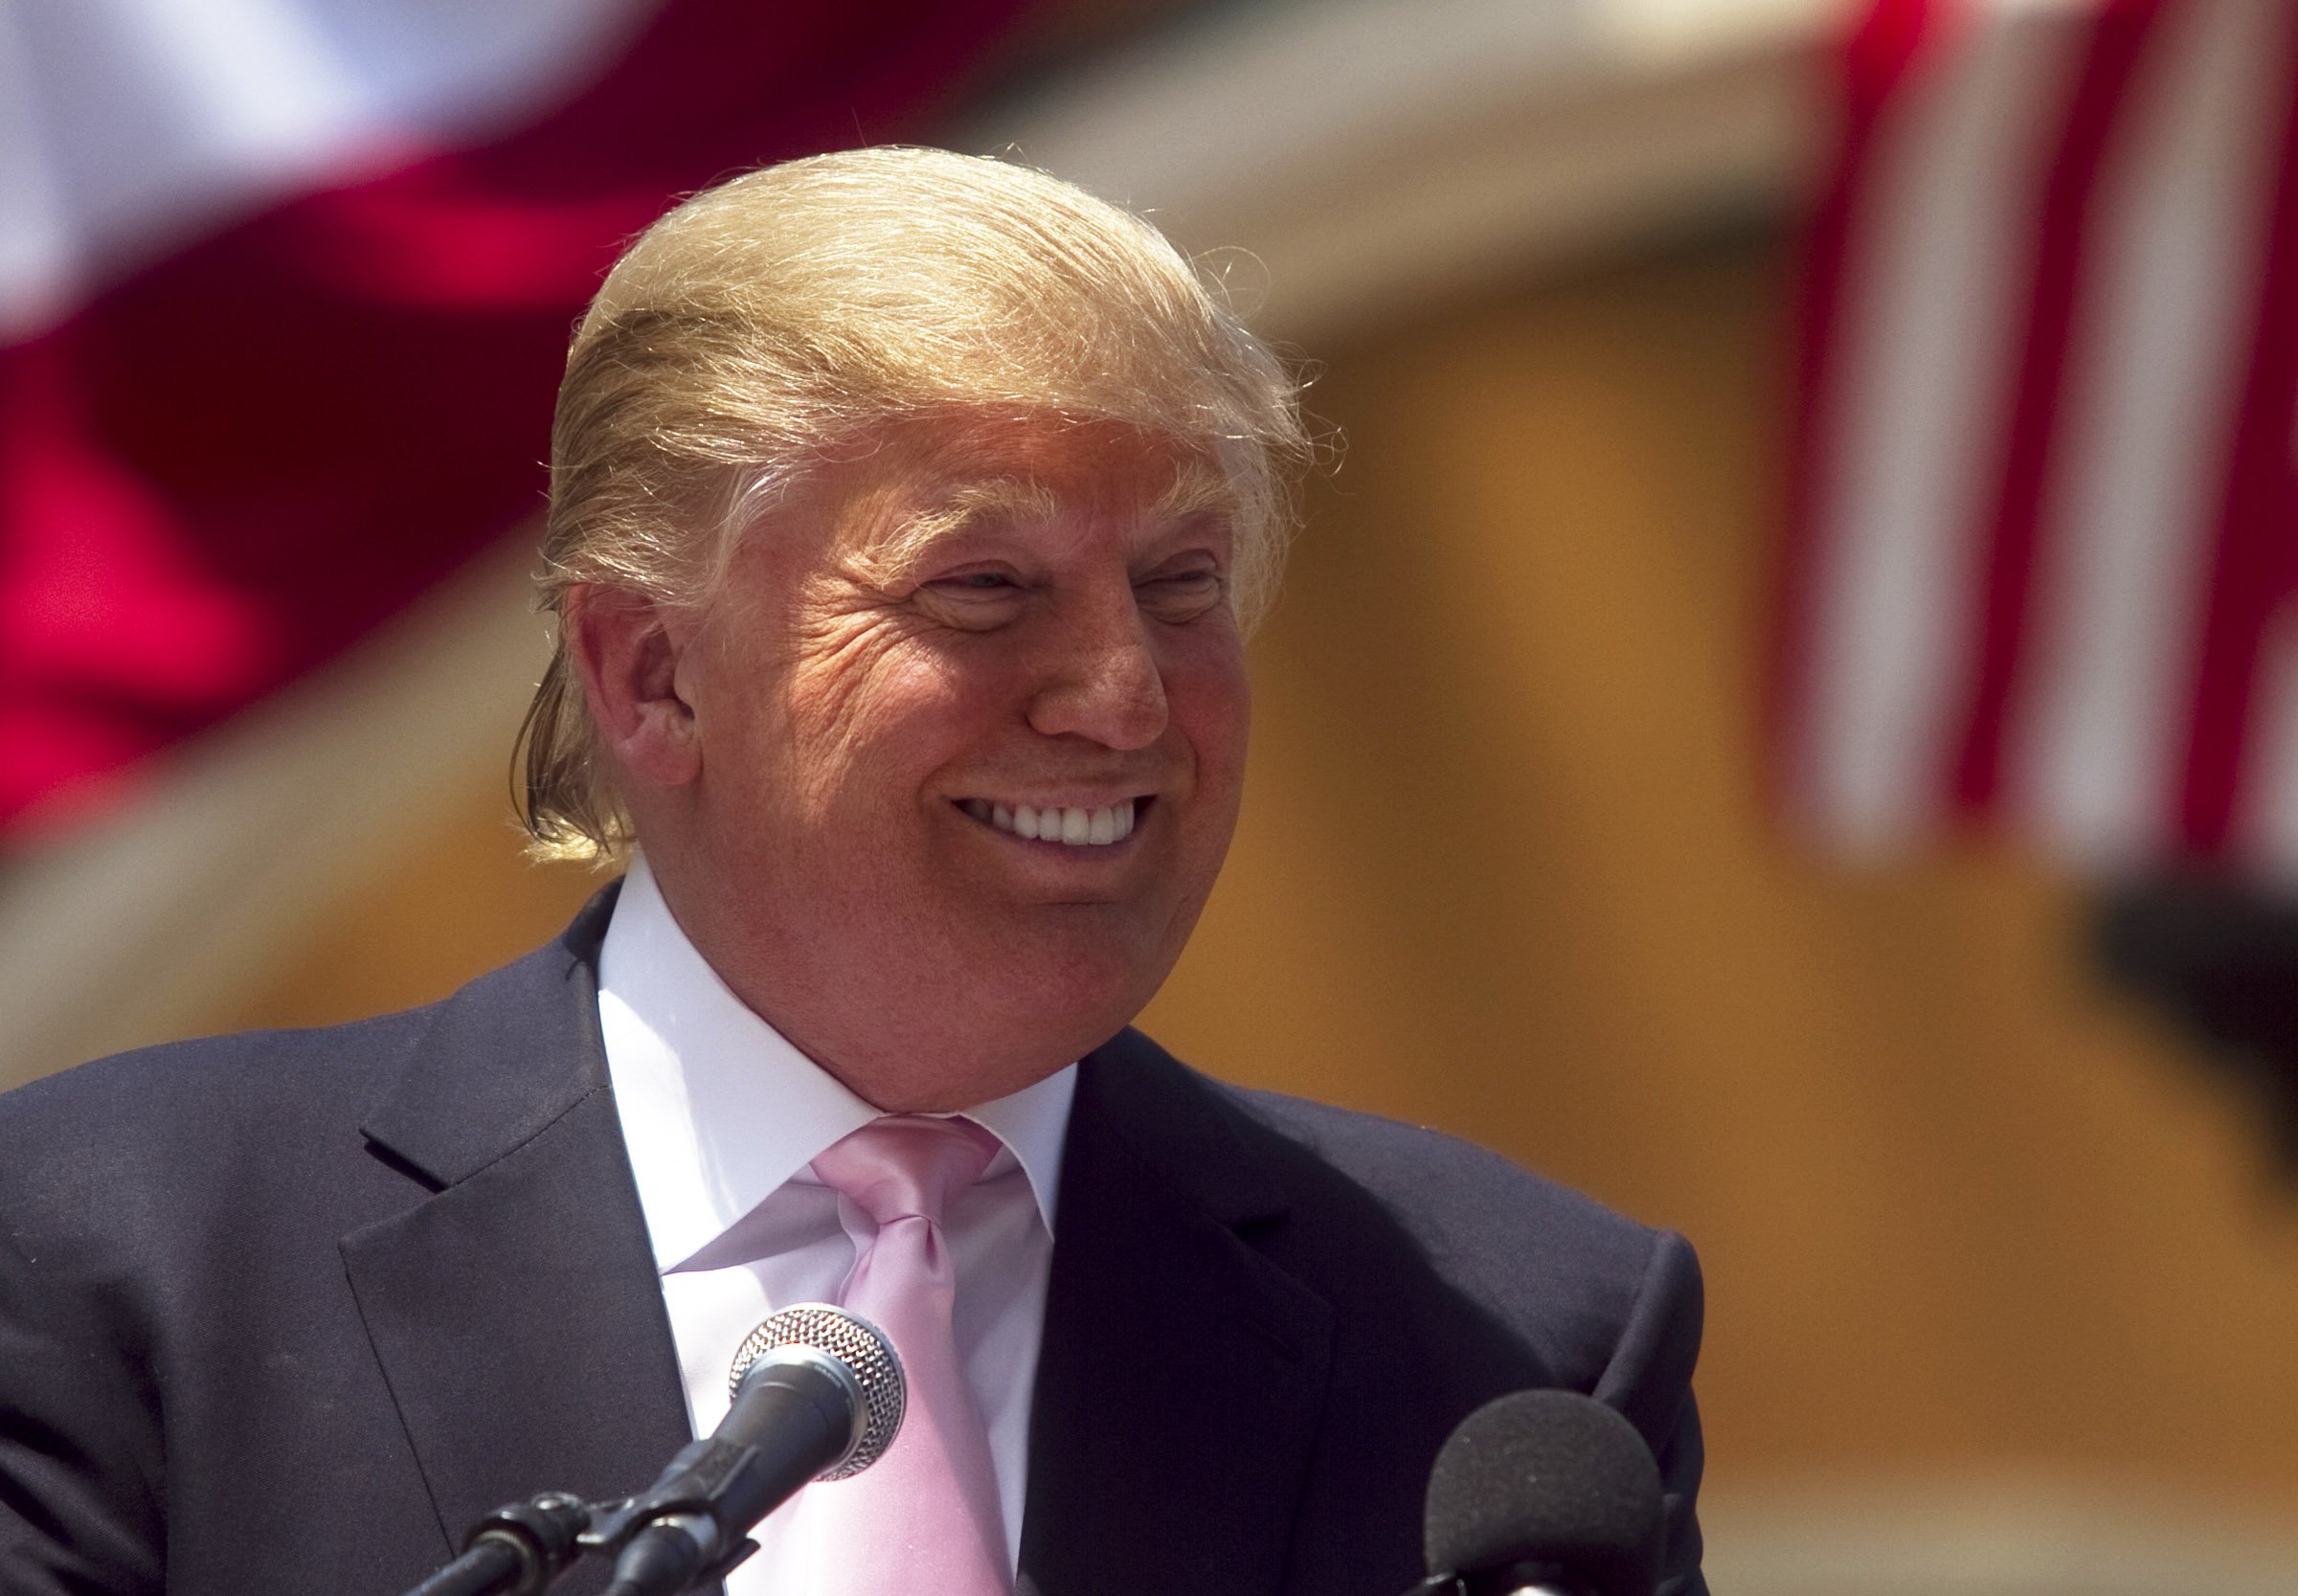  Donald Trump laughs while speaking to a crowd at the 2011 Palm Beach County Tax Day Tea Party on April 16, 2011, at Sanborn Square in Boca Raton, Florida. | Source: Getty Images.